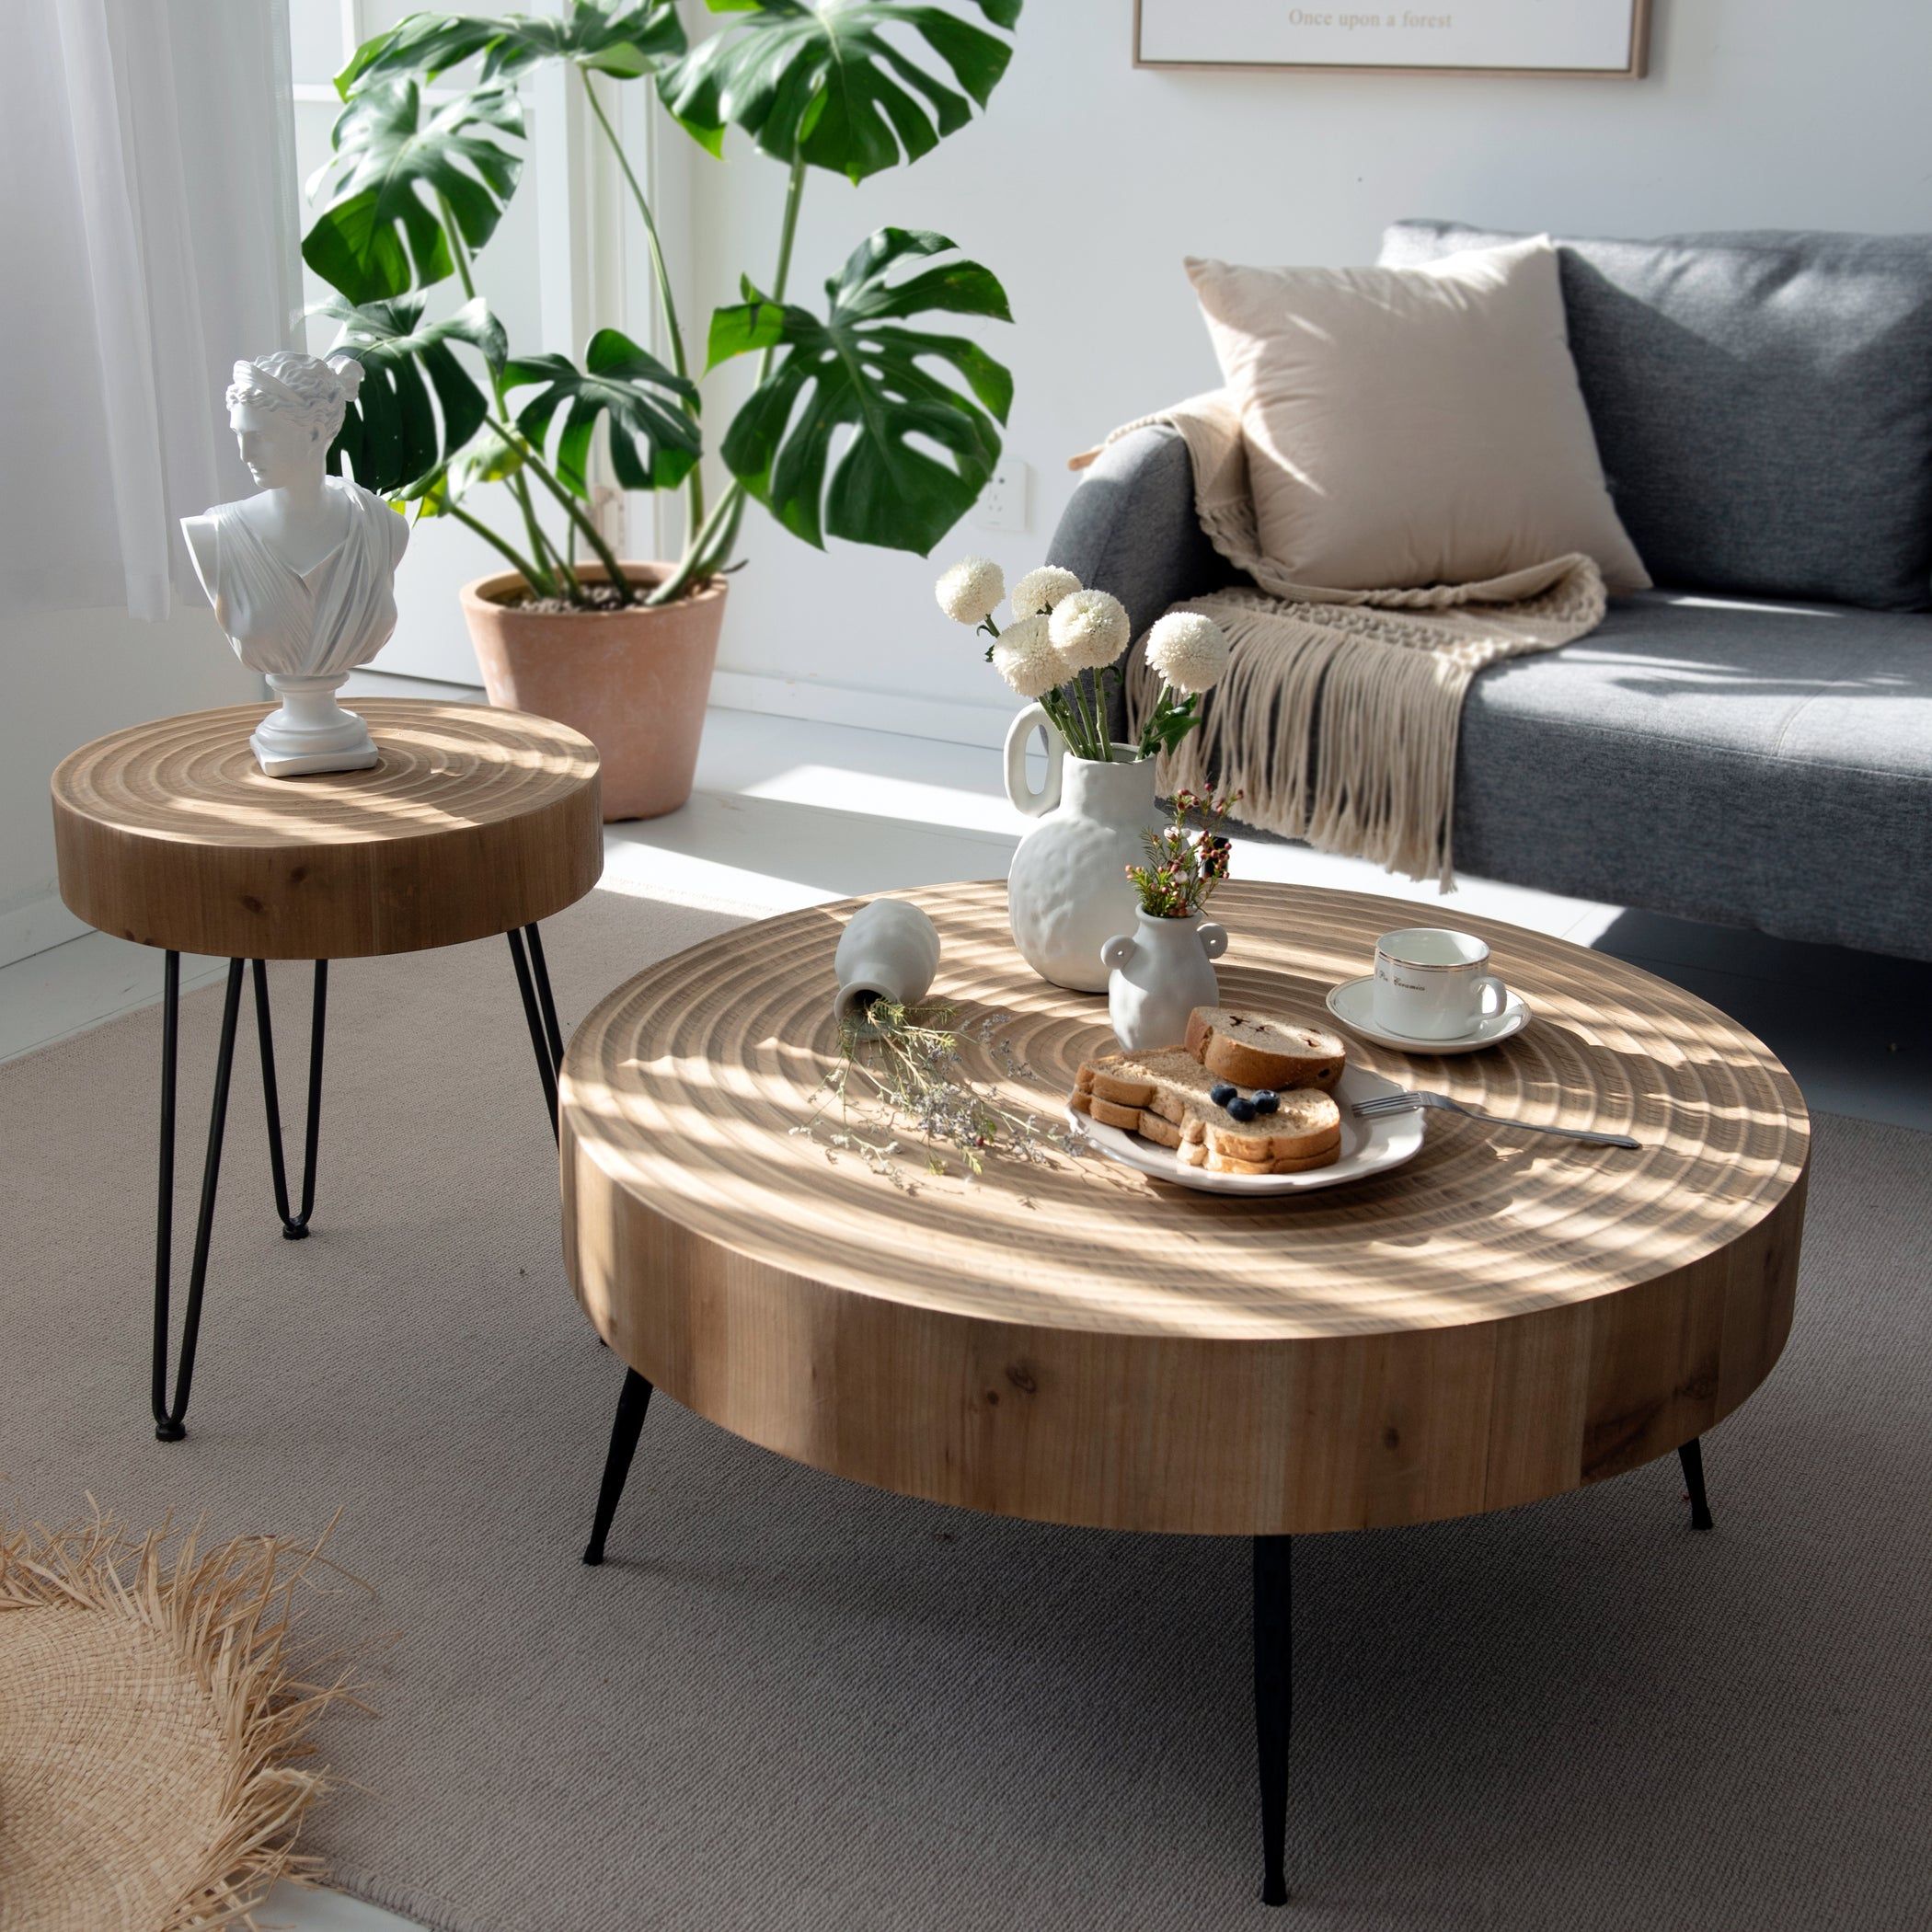 Cozayh 2 Piece Modern Farmhouse Living Room Coffee Table Set, Round Intended For Modern Farmhouse Coffee Table Sets (View 4 of 15)